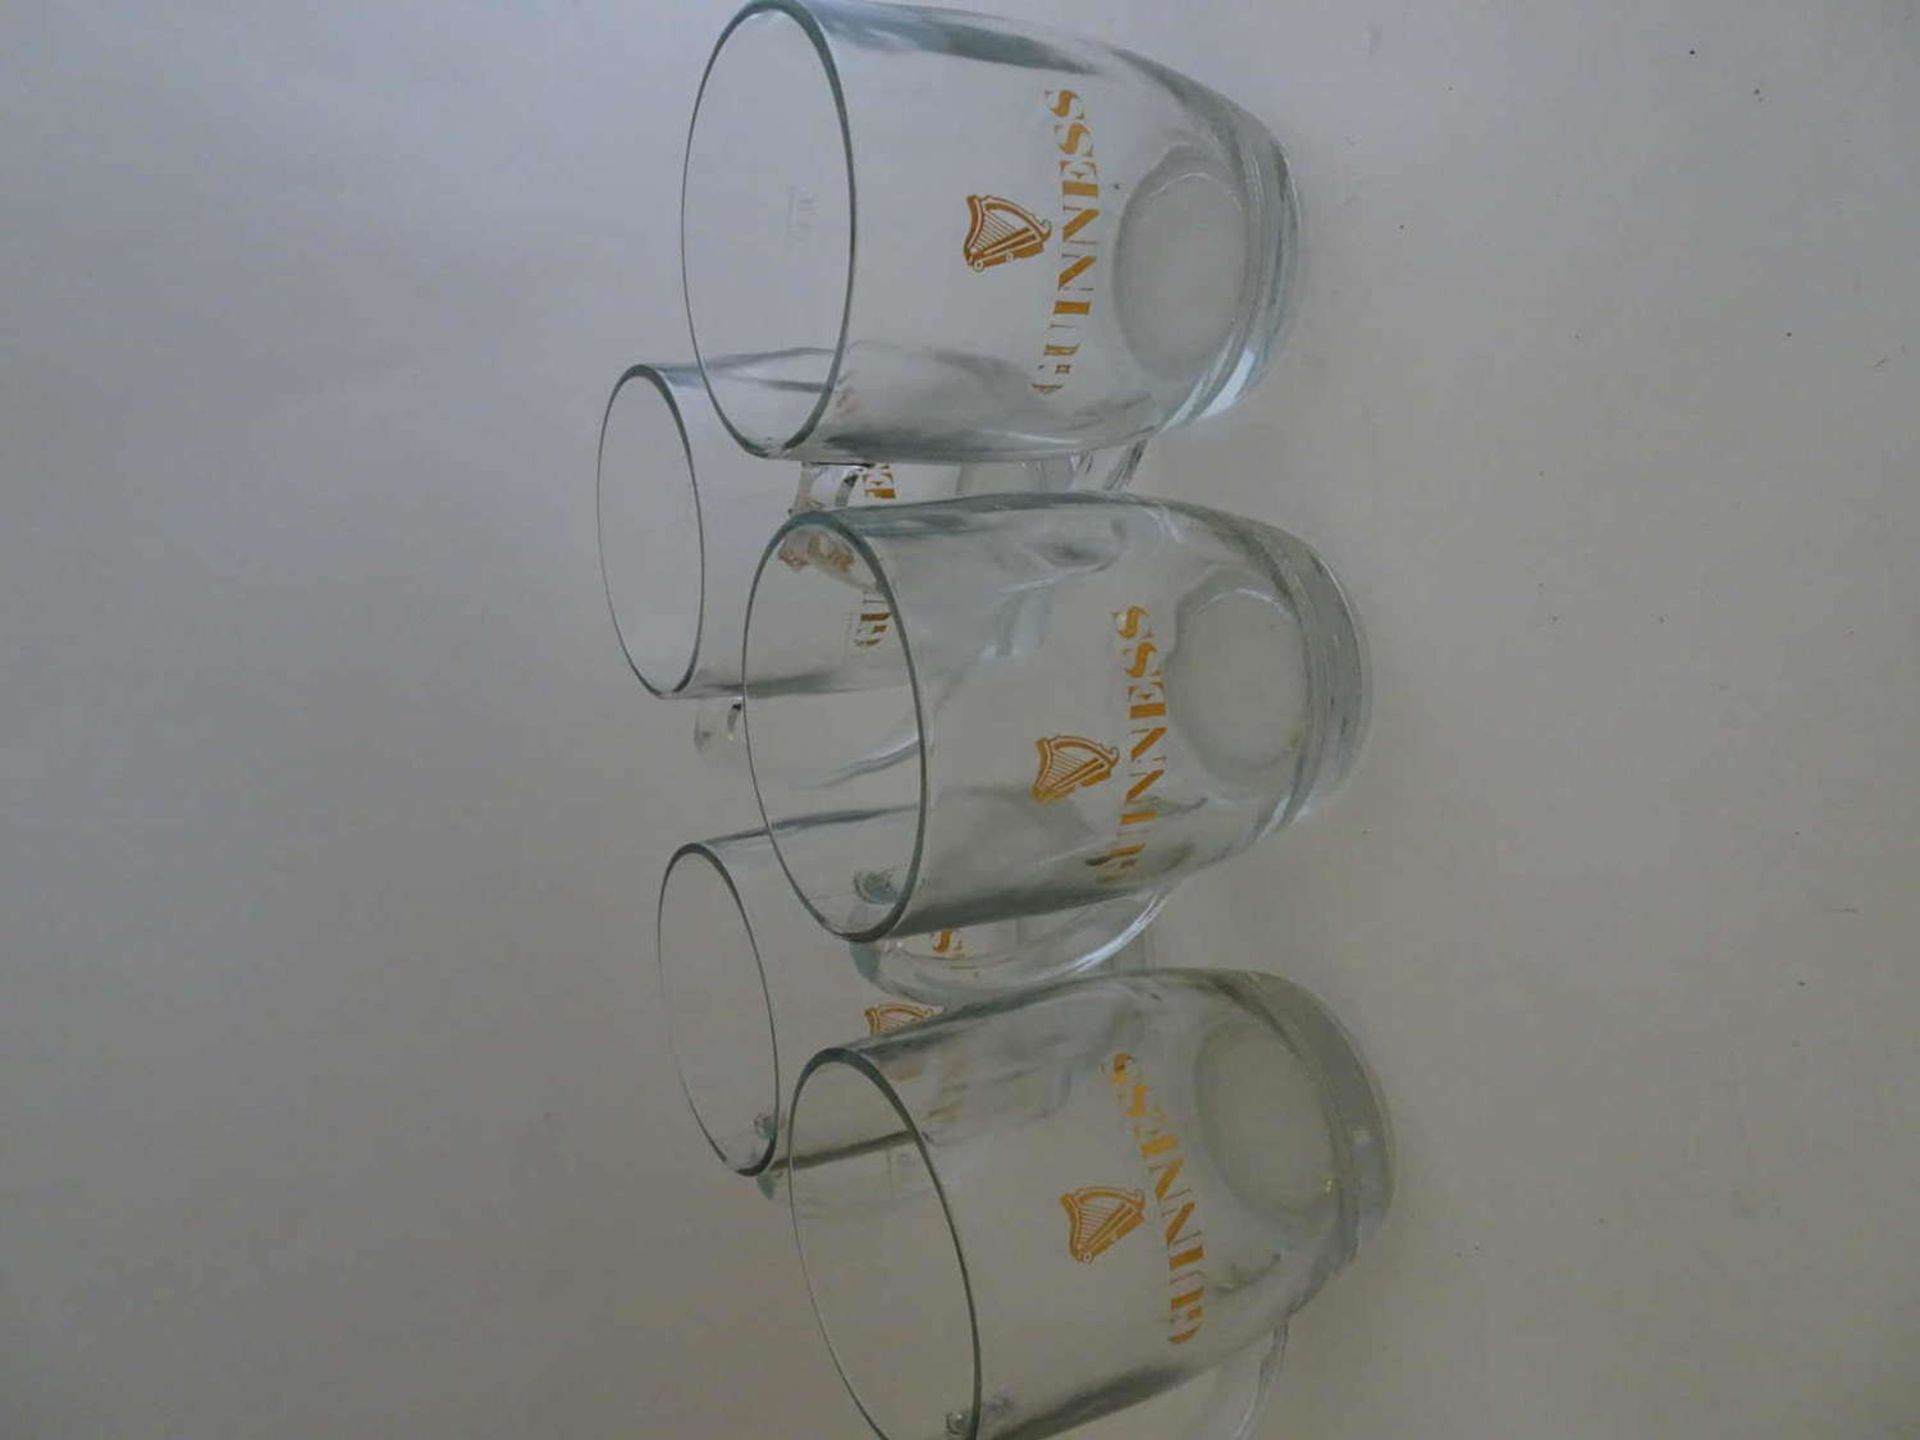 5 older Guiness glasses for the beer connoisseur, 0,4 ltr. Calibration mark. Good condition.